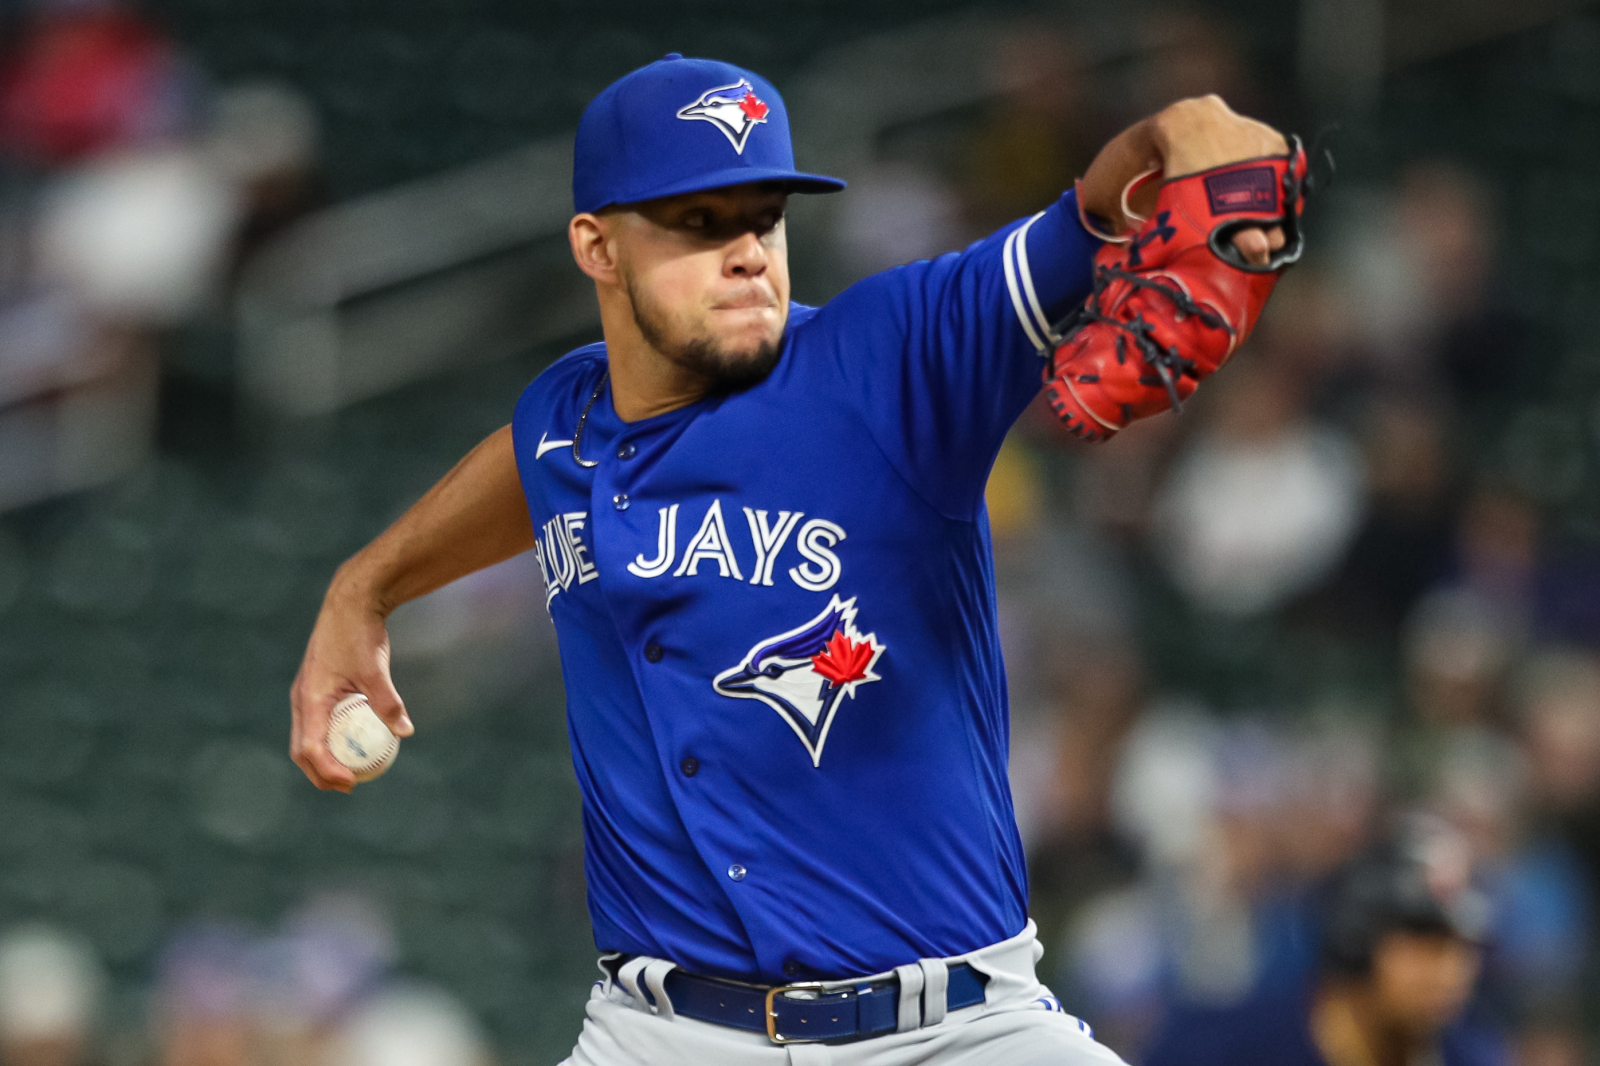 Jose Berrios agrees to seven-year deal with Blue Jays to raise his